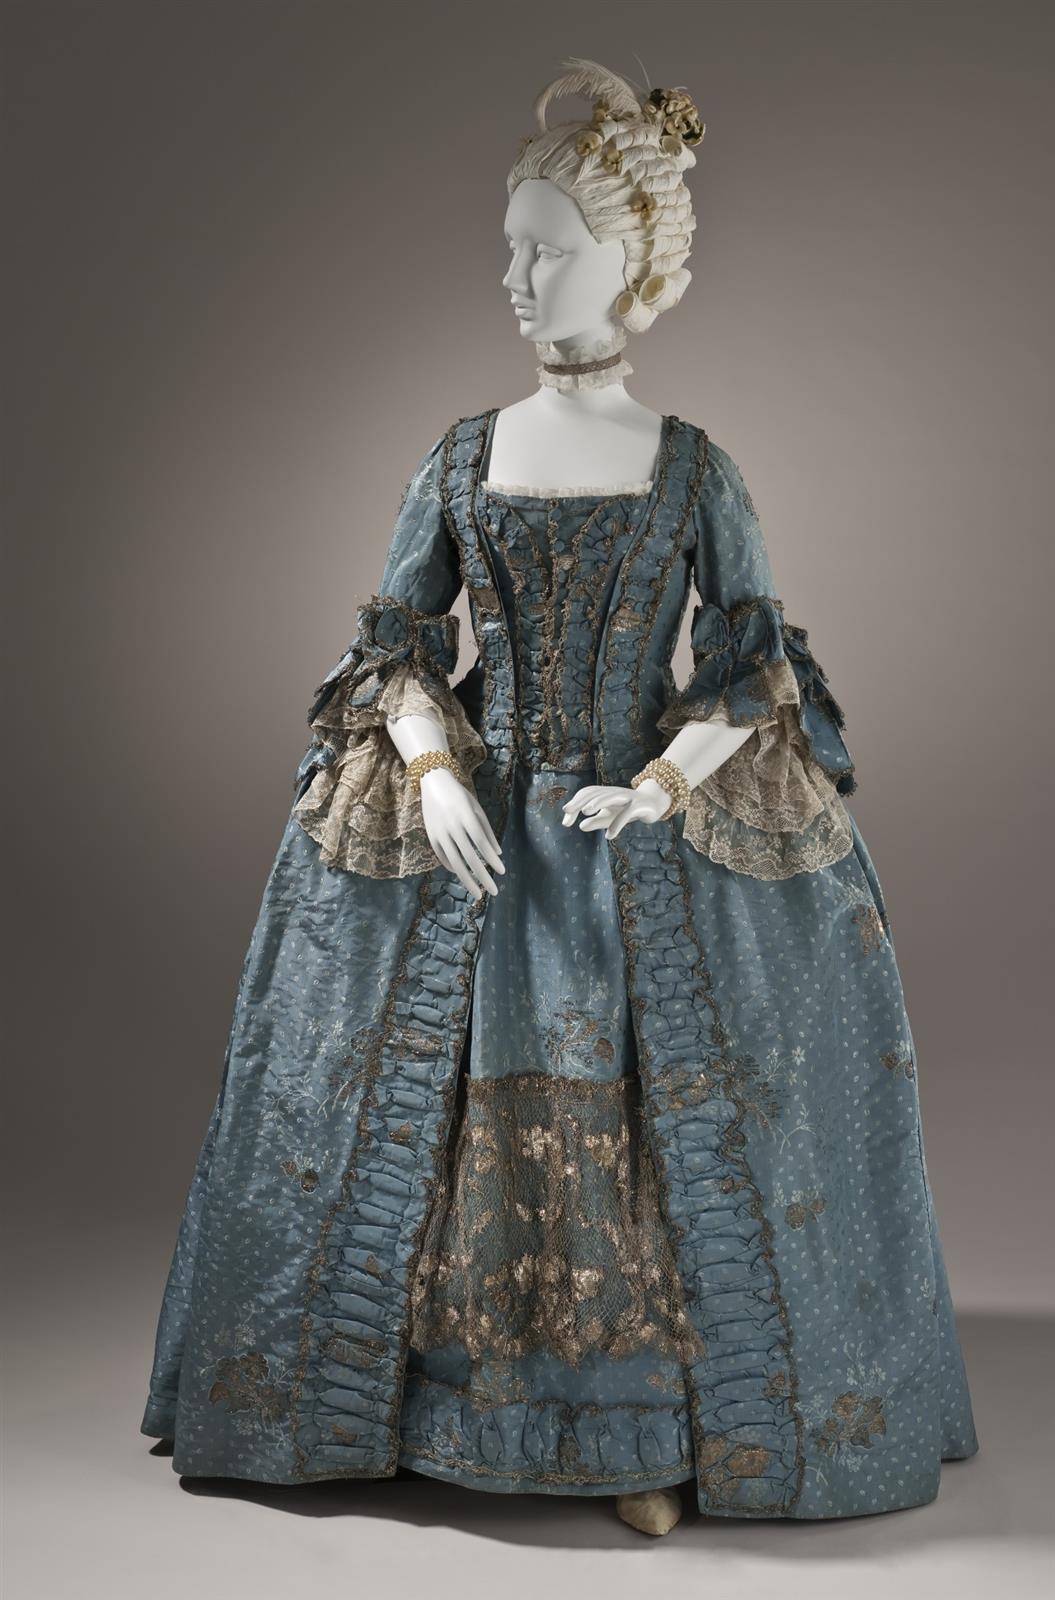 1765. Woman's Dress and Petticoat (Robe à la française). Silk plain weave (faille) with silk and metallic-thread supplementary-weft patterning, and metallic lace. LACMA